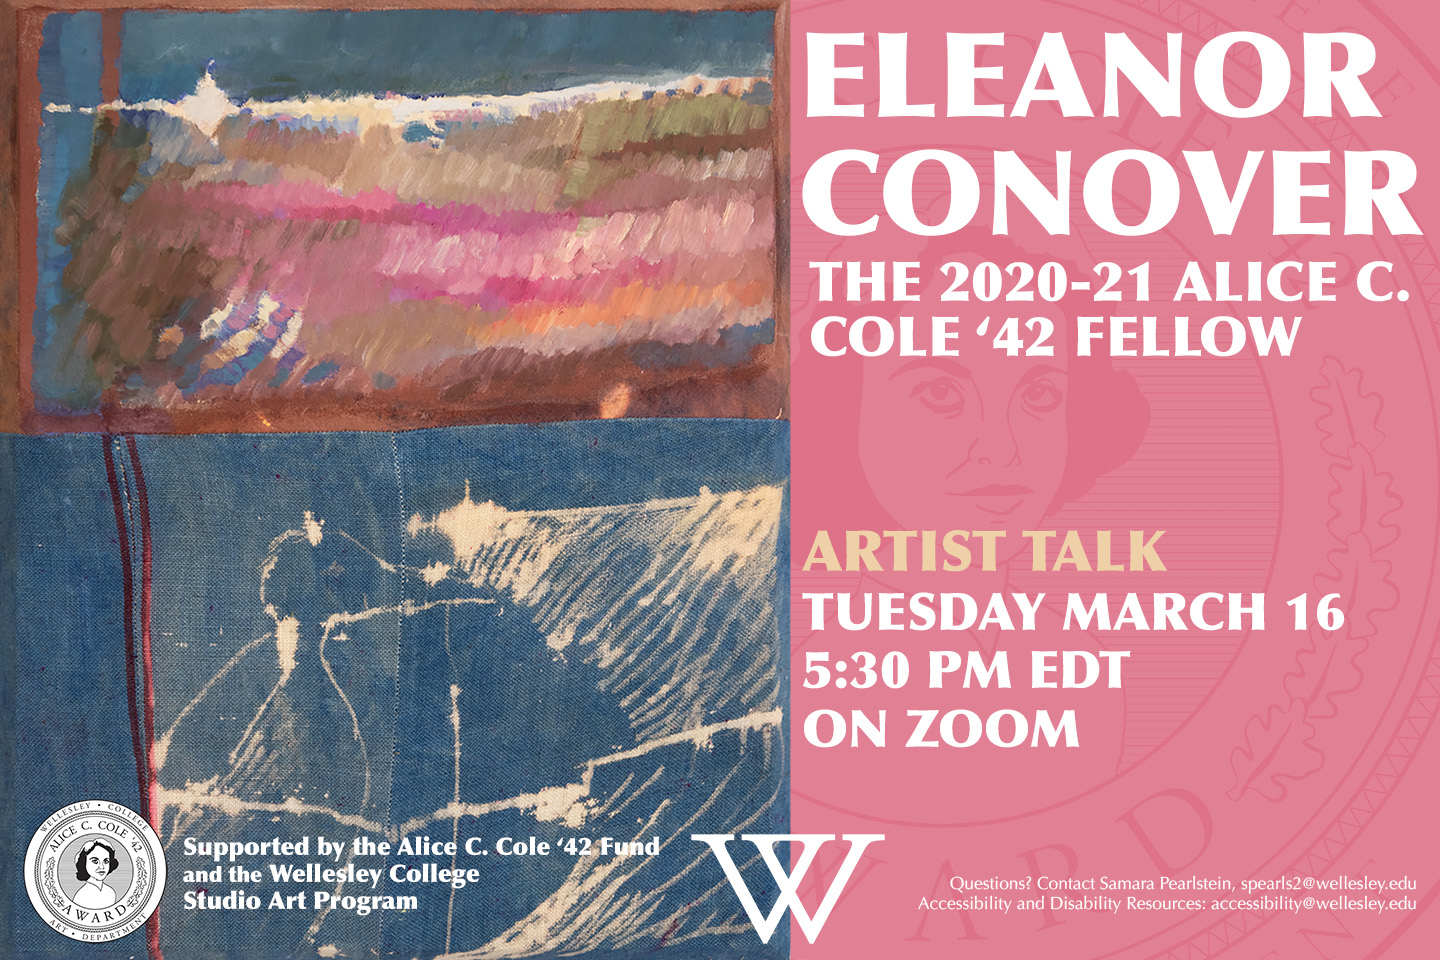 poster for artist talk with abstract blue, pink, brown, and cream painting on the left; right side is pink with an overlay of the Cole fellowship logo